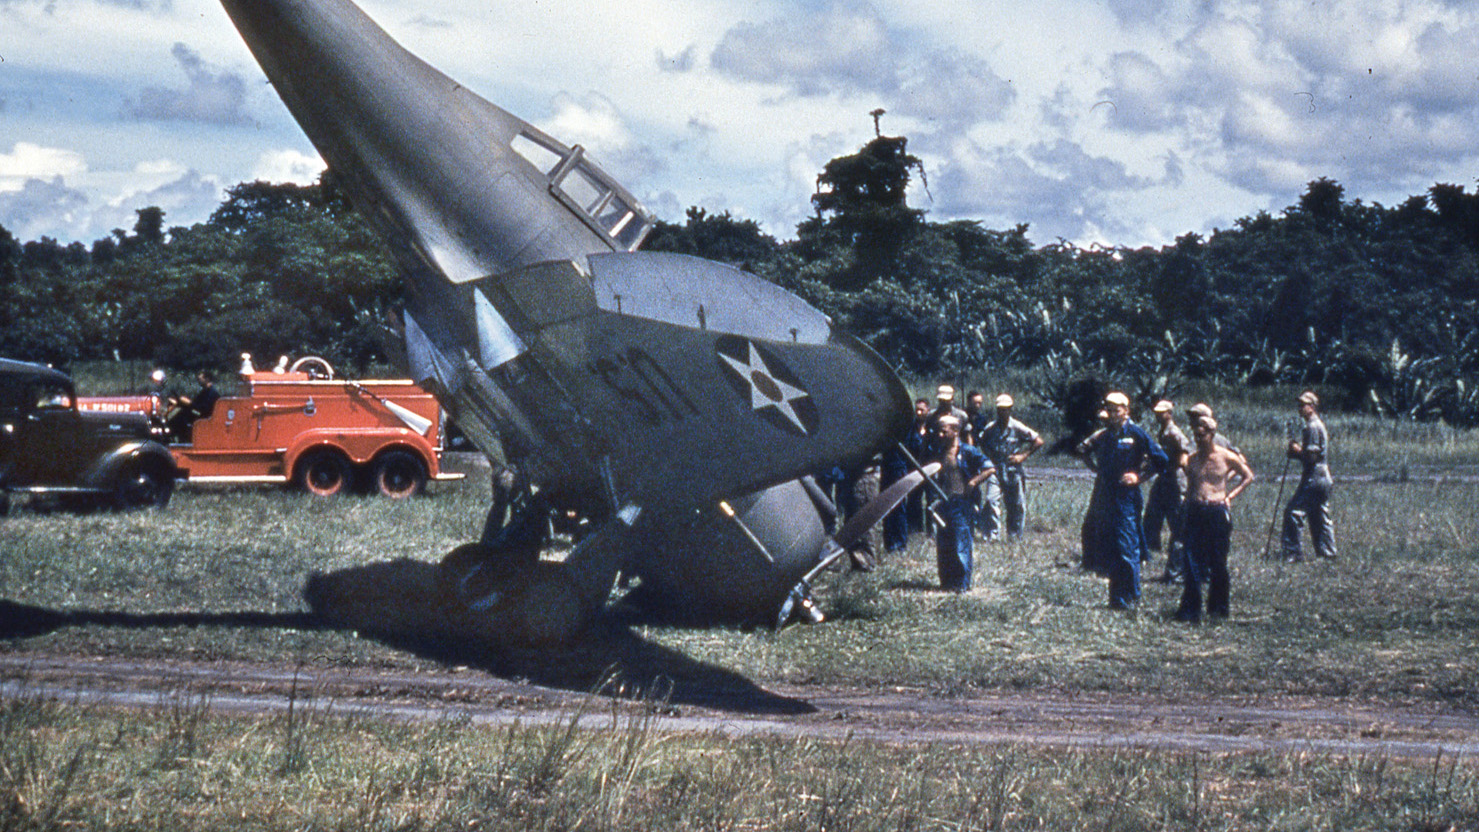 This Seversky P-35 fighter plane has nosed over during a landing at Clark Field in the Philippines. Like other types flown by the 27th Bomb Group, the P-35 was obsolete during World War II and outclassed by Japanese fighter types.